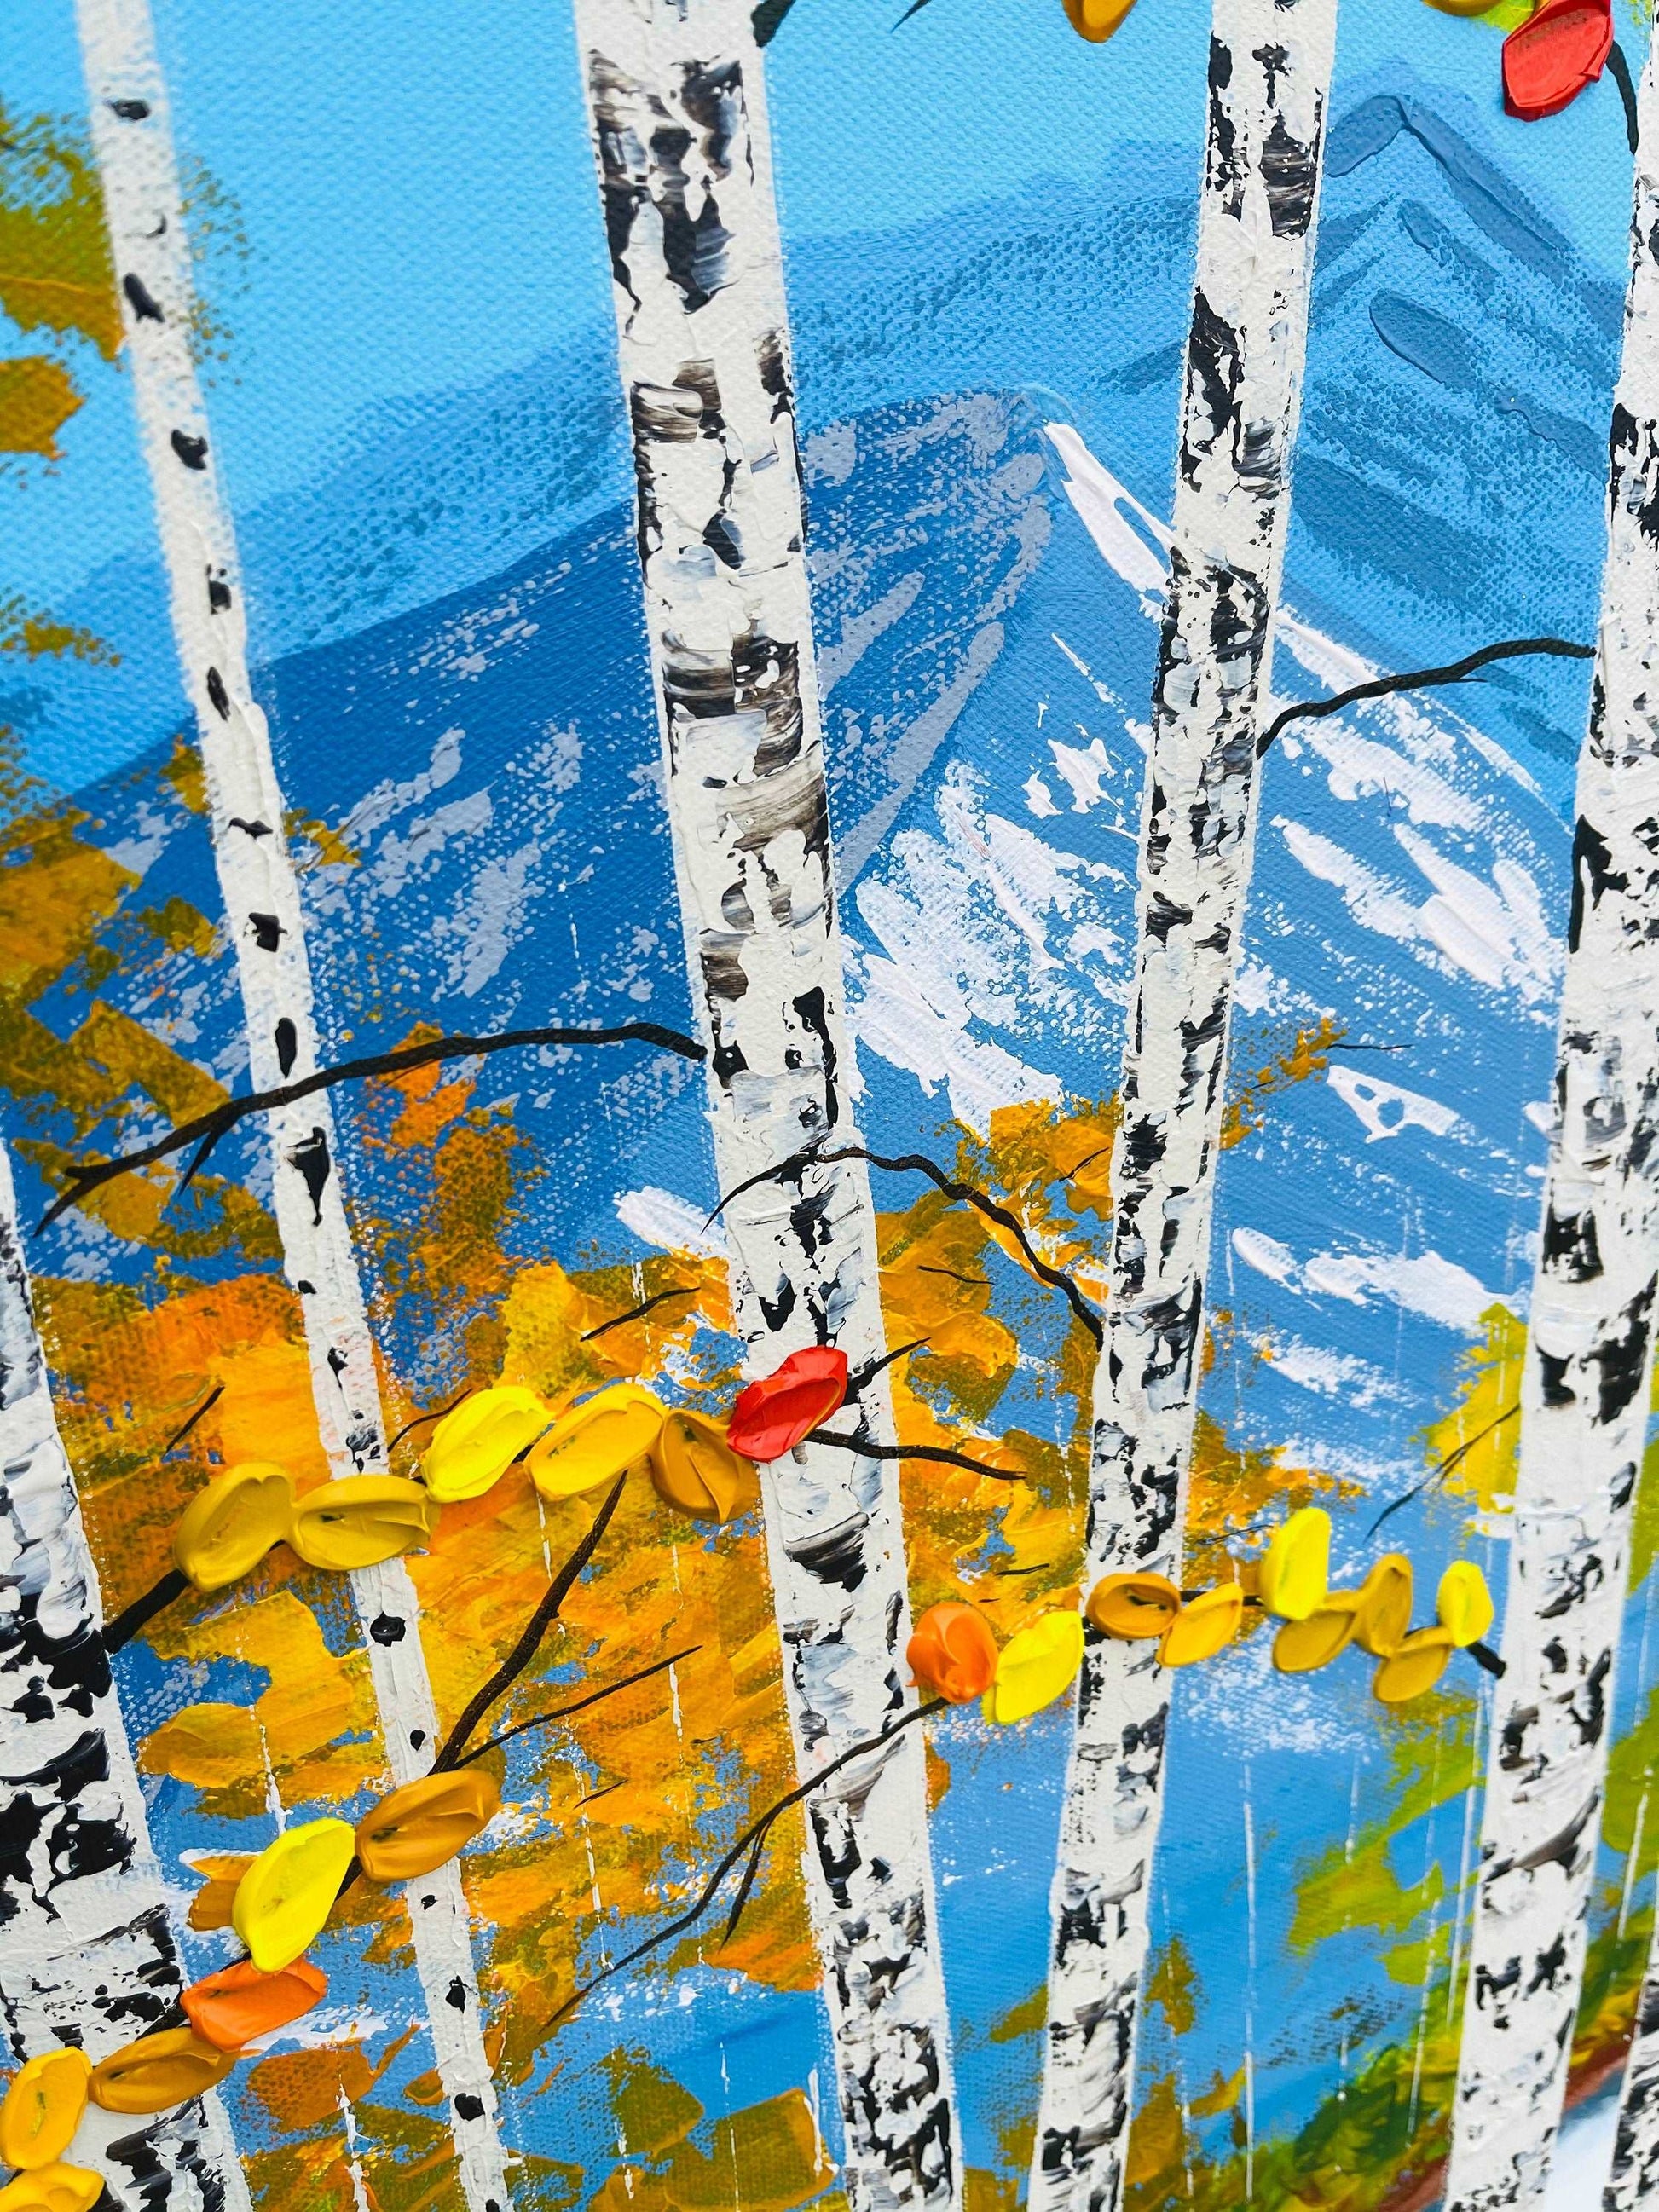 Landscape Painting, Aspens with River